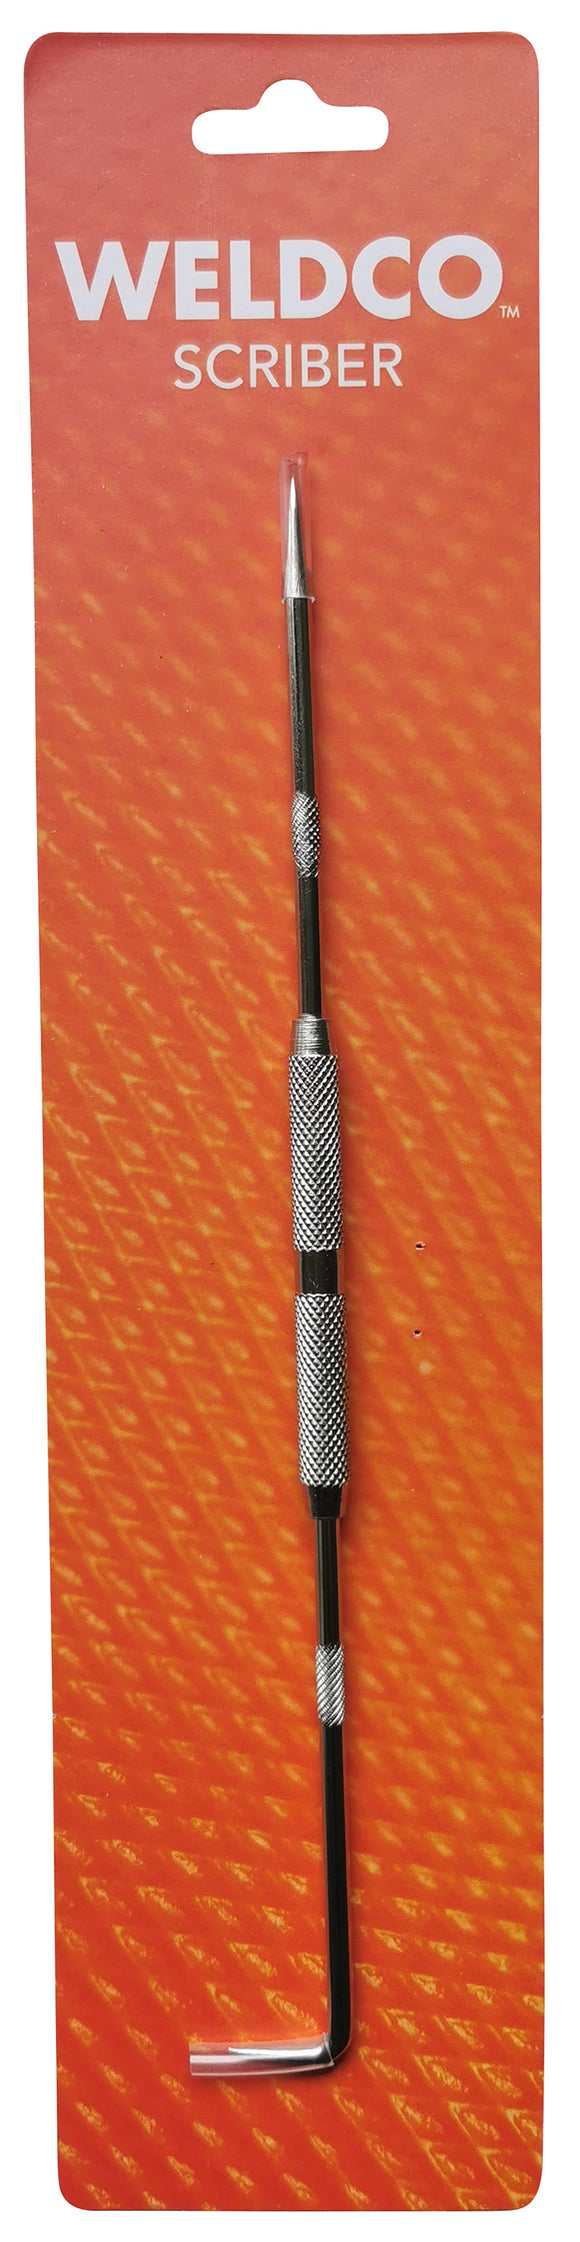 Double ended scriber with one straight tip and one 90º Chrome plated hook and angle tips Knurled aluminium handle for a positive grip Overall length 225mm